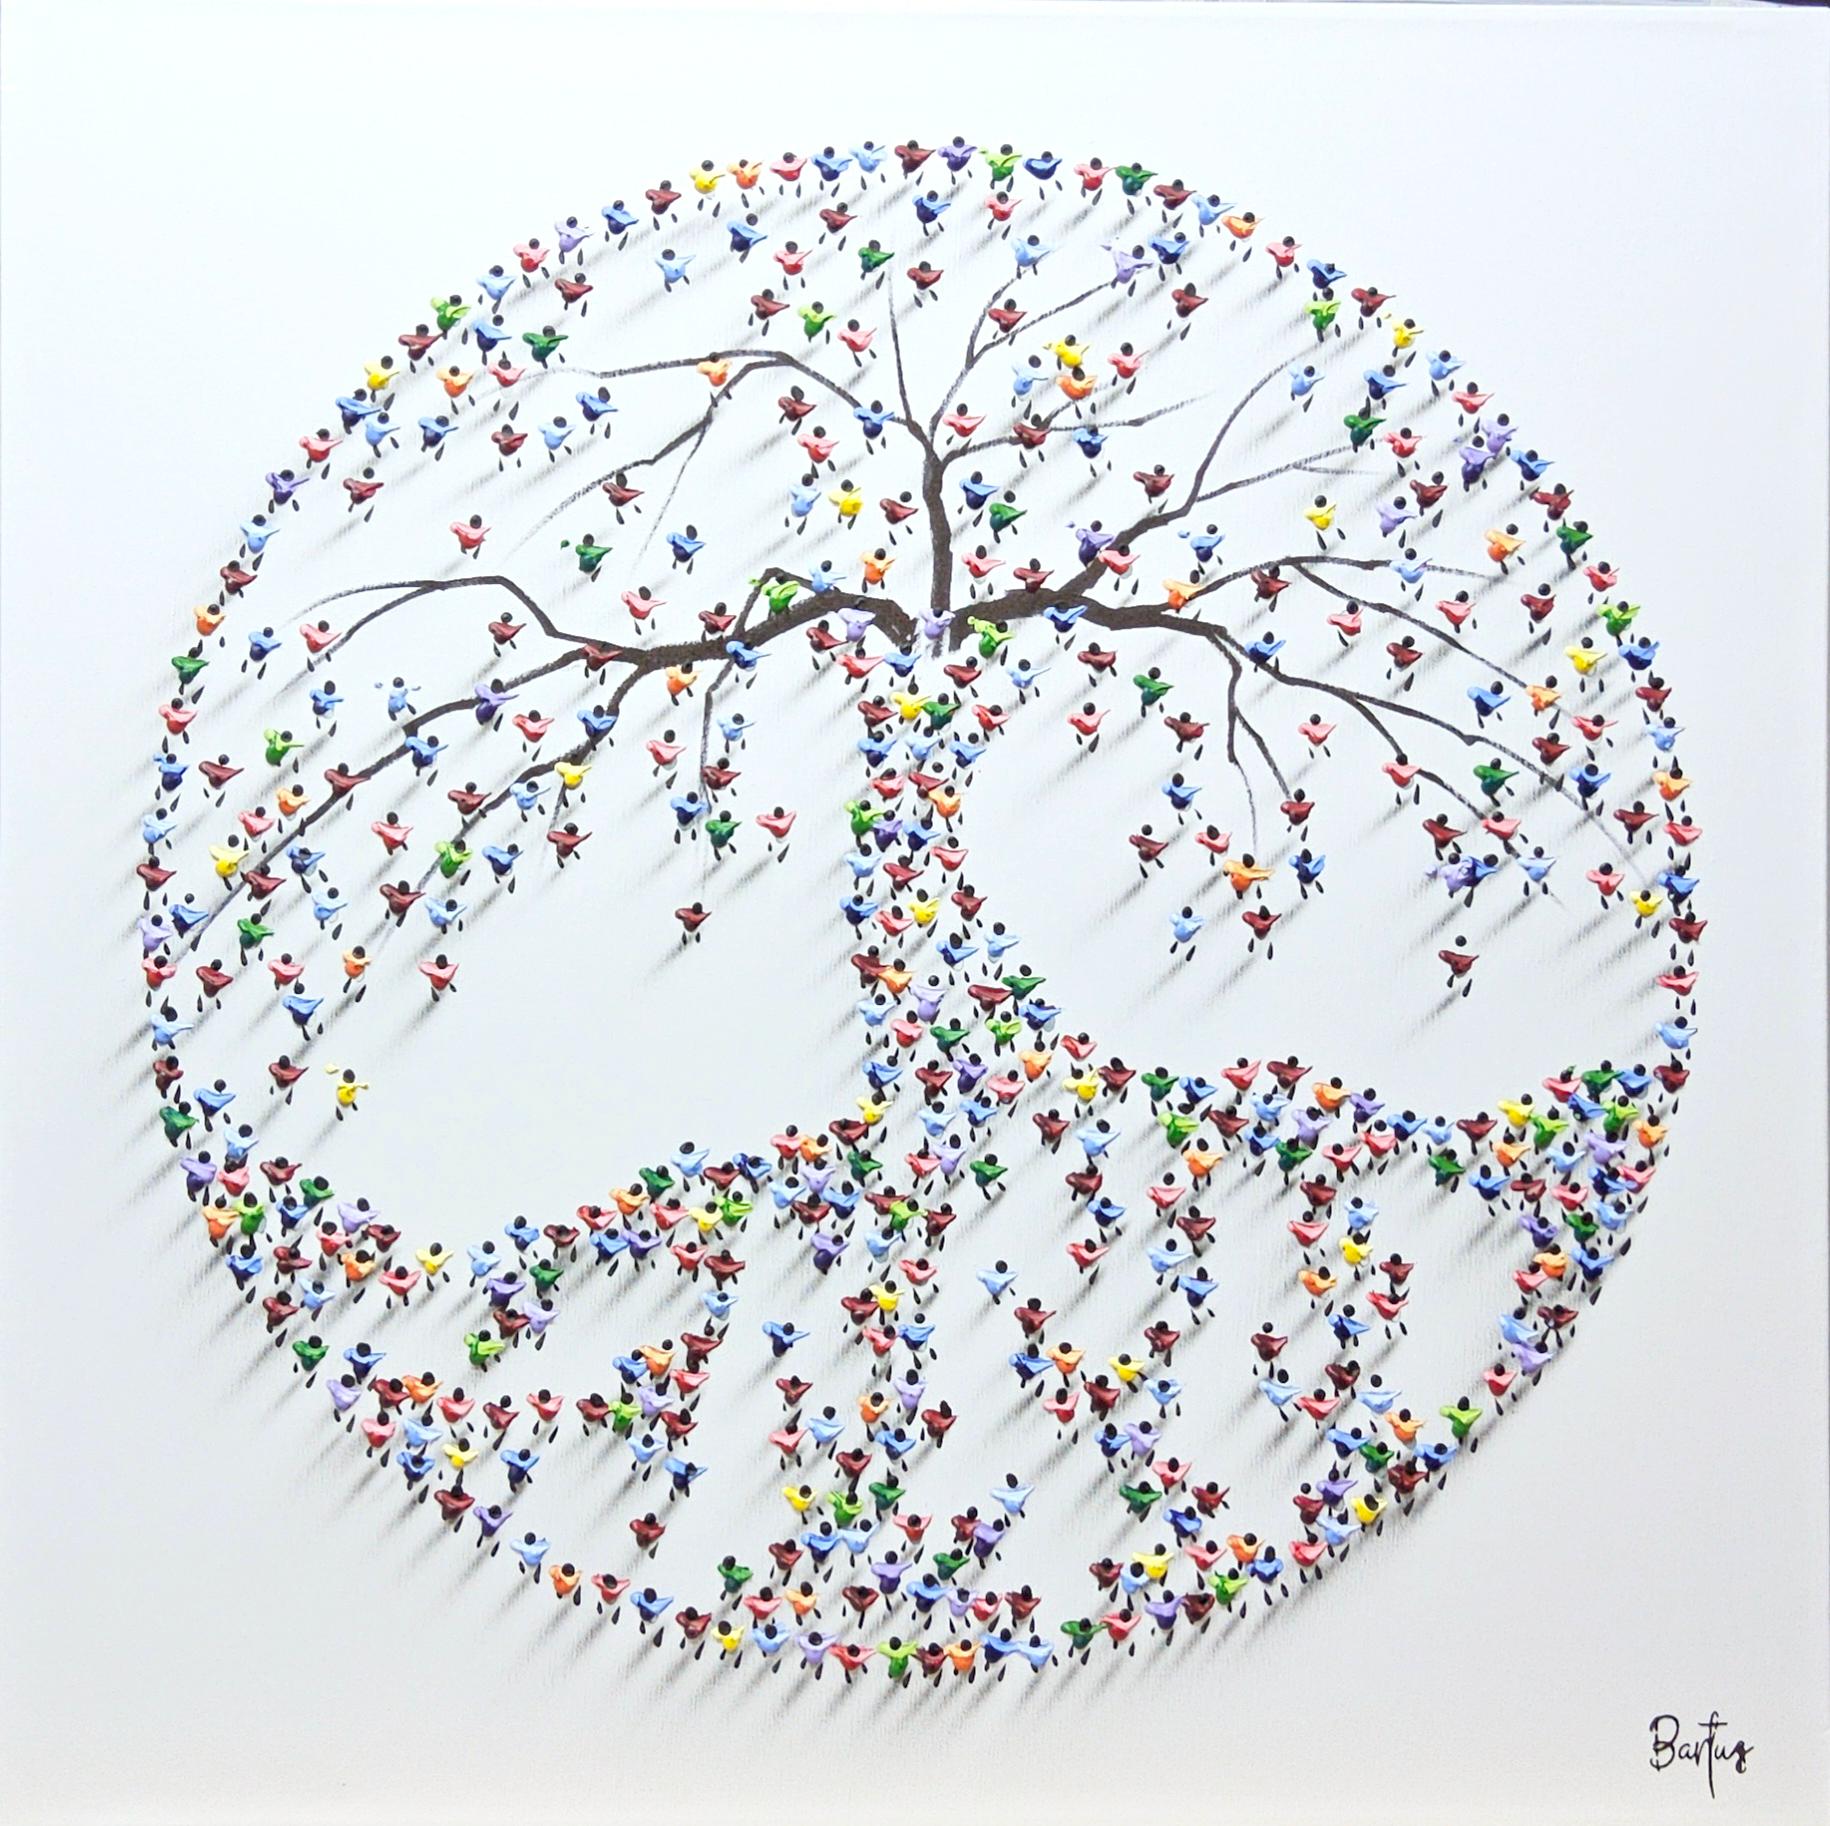 Francisco Bartus, "We Grow Stronger Together ", 32x32 Tree of Life Painting 